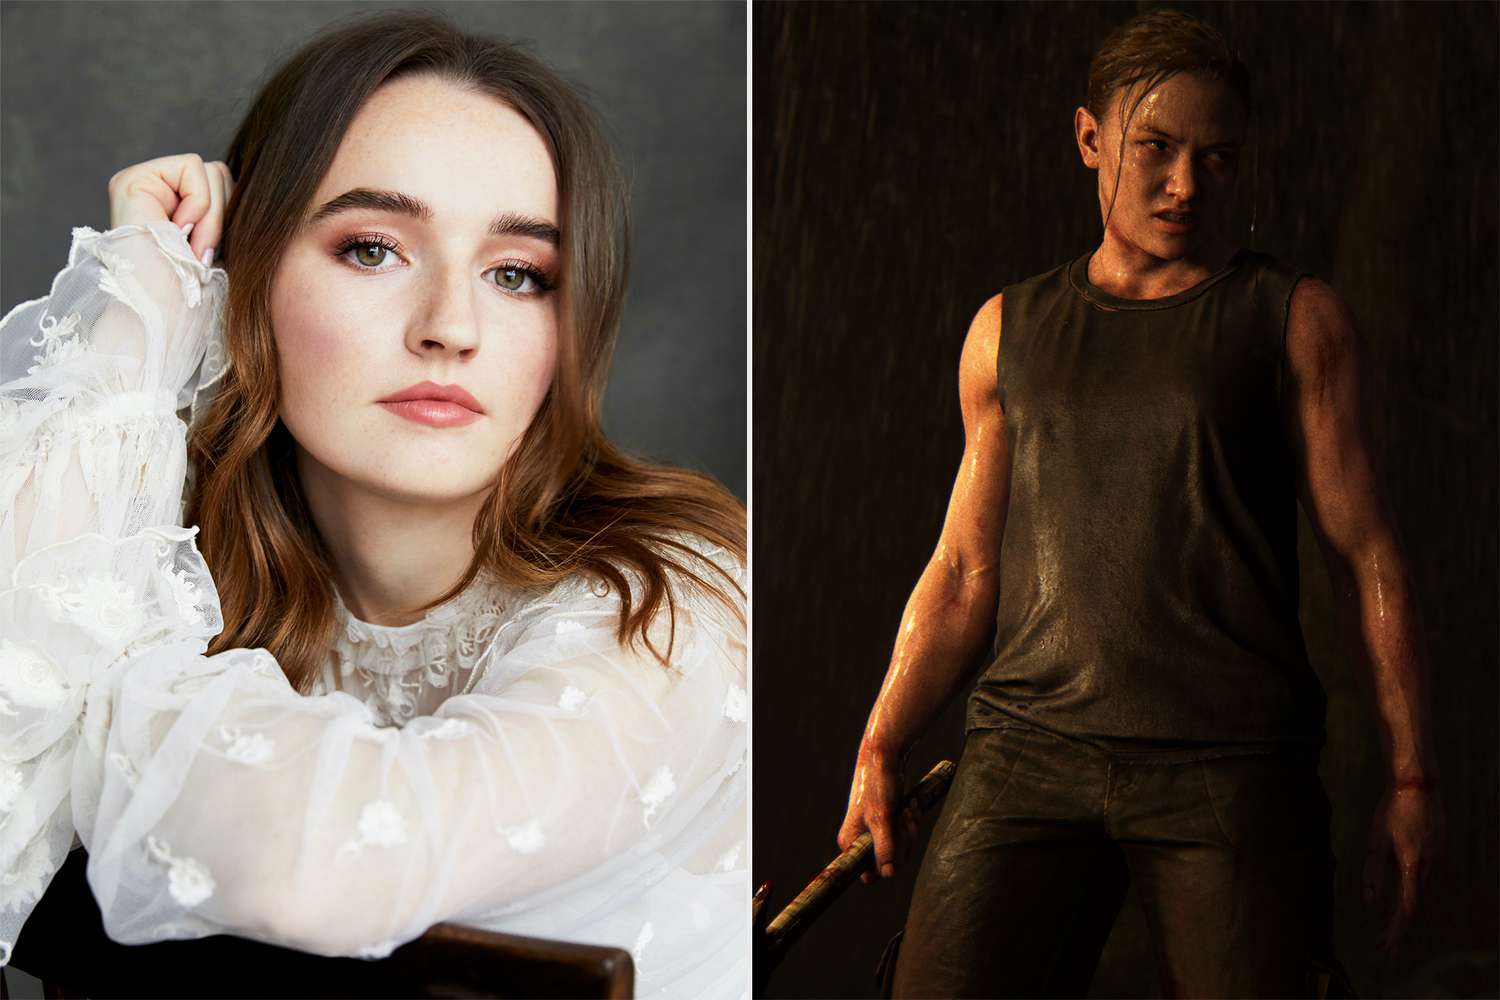 Kaitlyn Dever Confirmed as Abby in Award-Winning ‘The Last of Us’ for Second Season on HBO Max